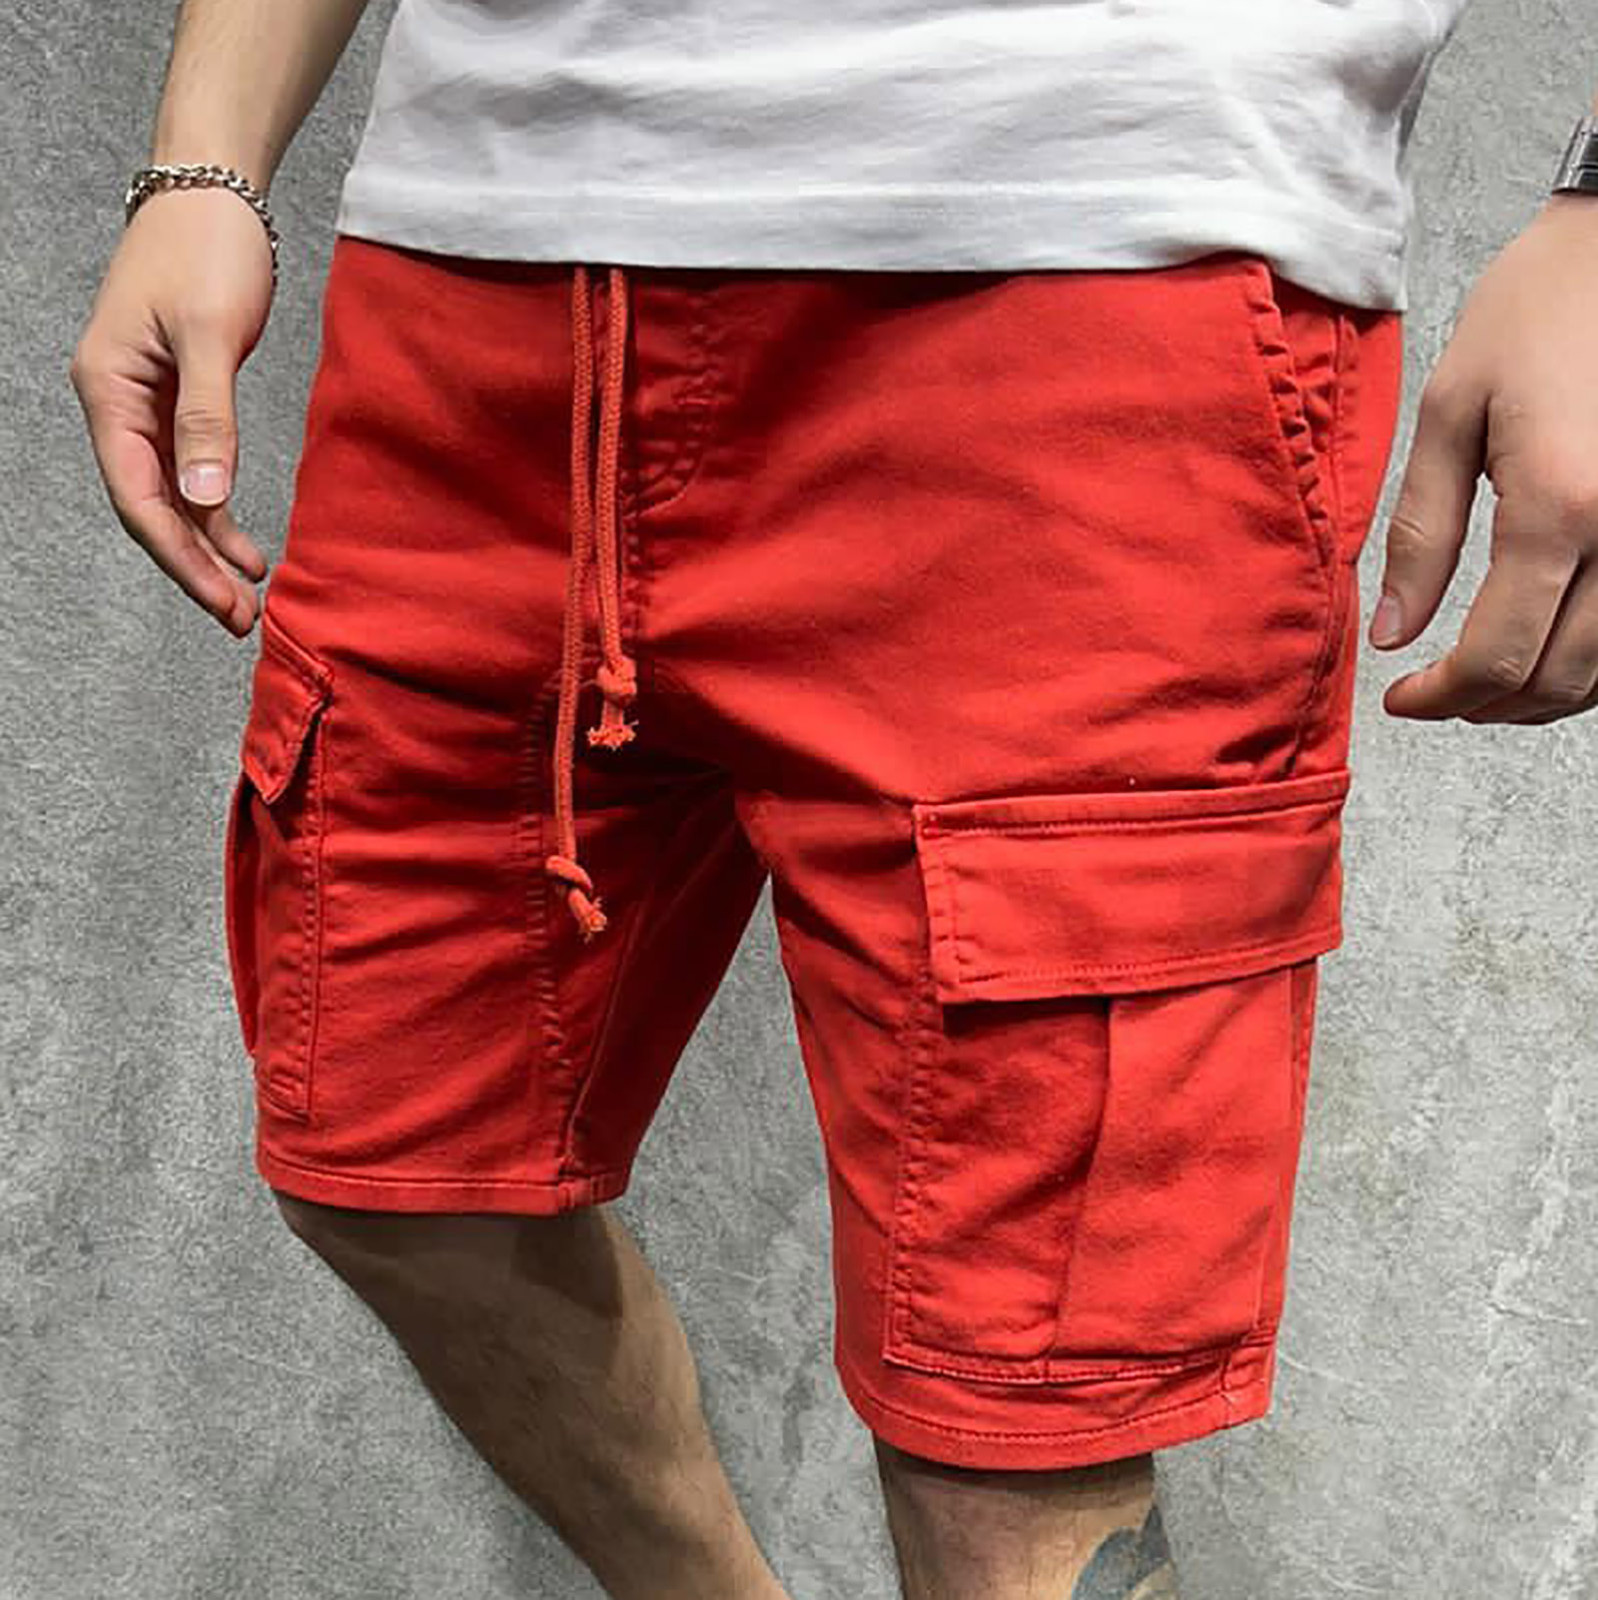 Hot6sl Work Shorts for Men, Summer Lightweight Outdoor Shorts Cotton  Distressed Washed Style Red XL # Lighten Deals Of The Day Prime # Clearance  #2 